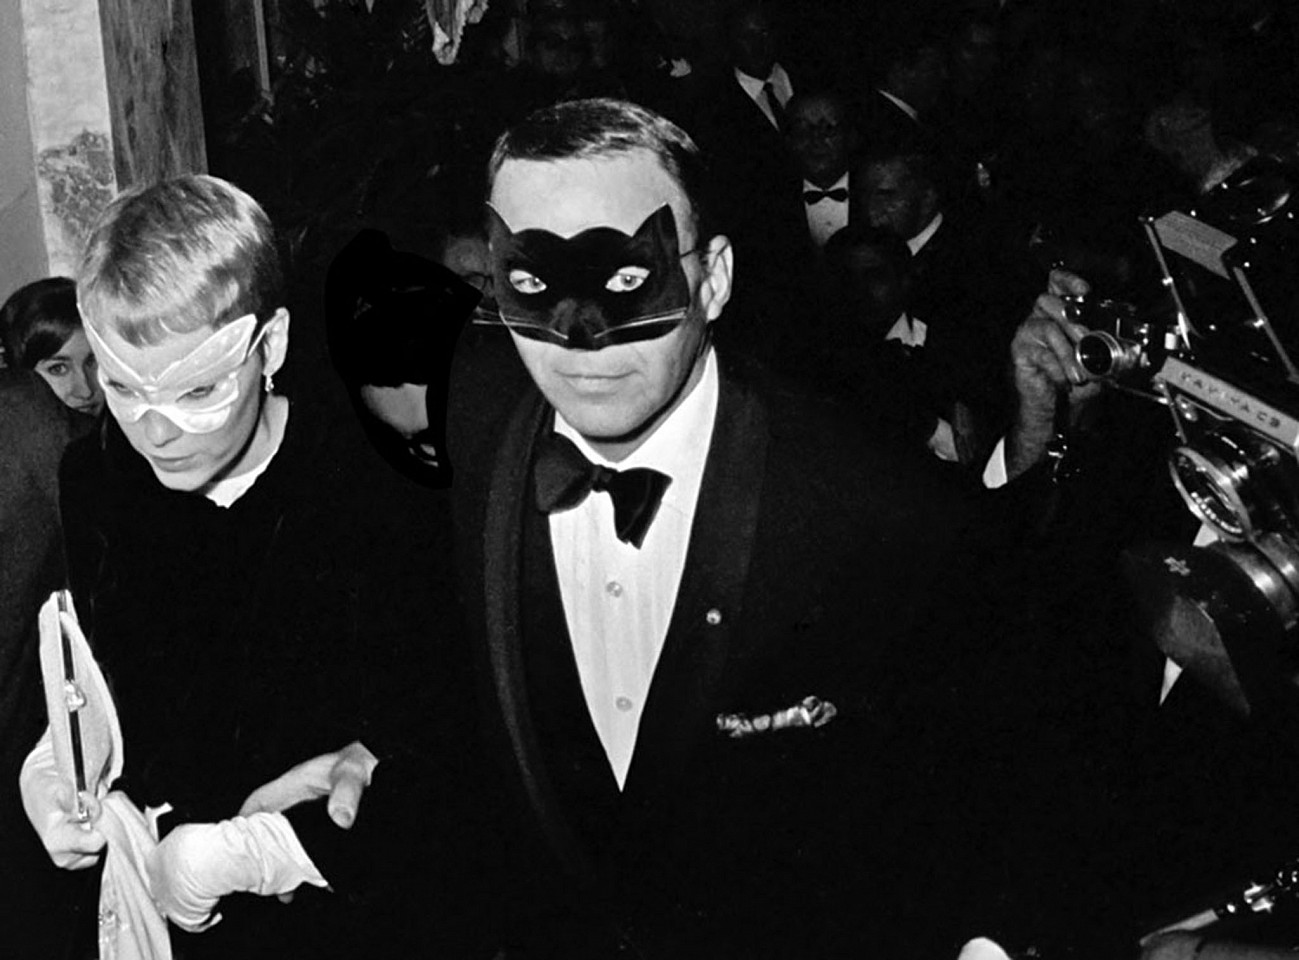 Harry Benson, Frank and Mia, Capote Masked Ball, 1966
Archival Pigment Print, 24 x 30 inches